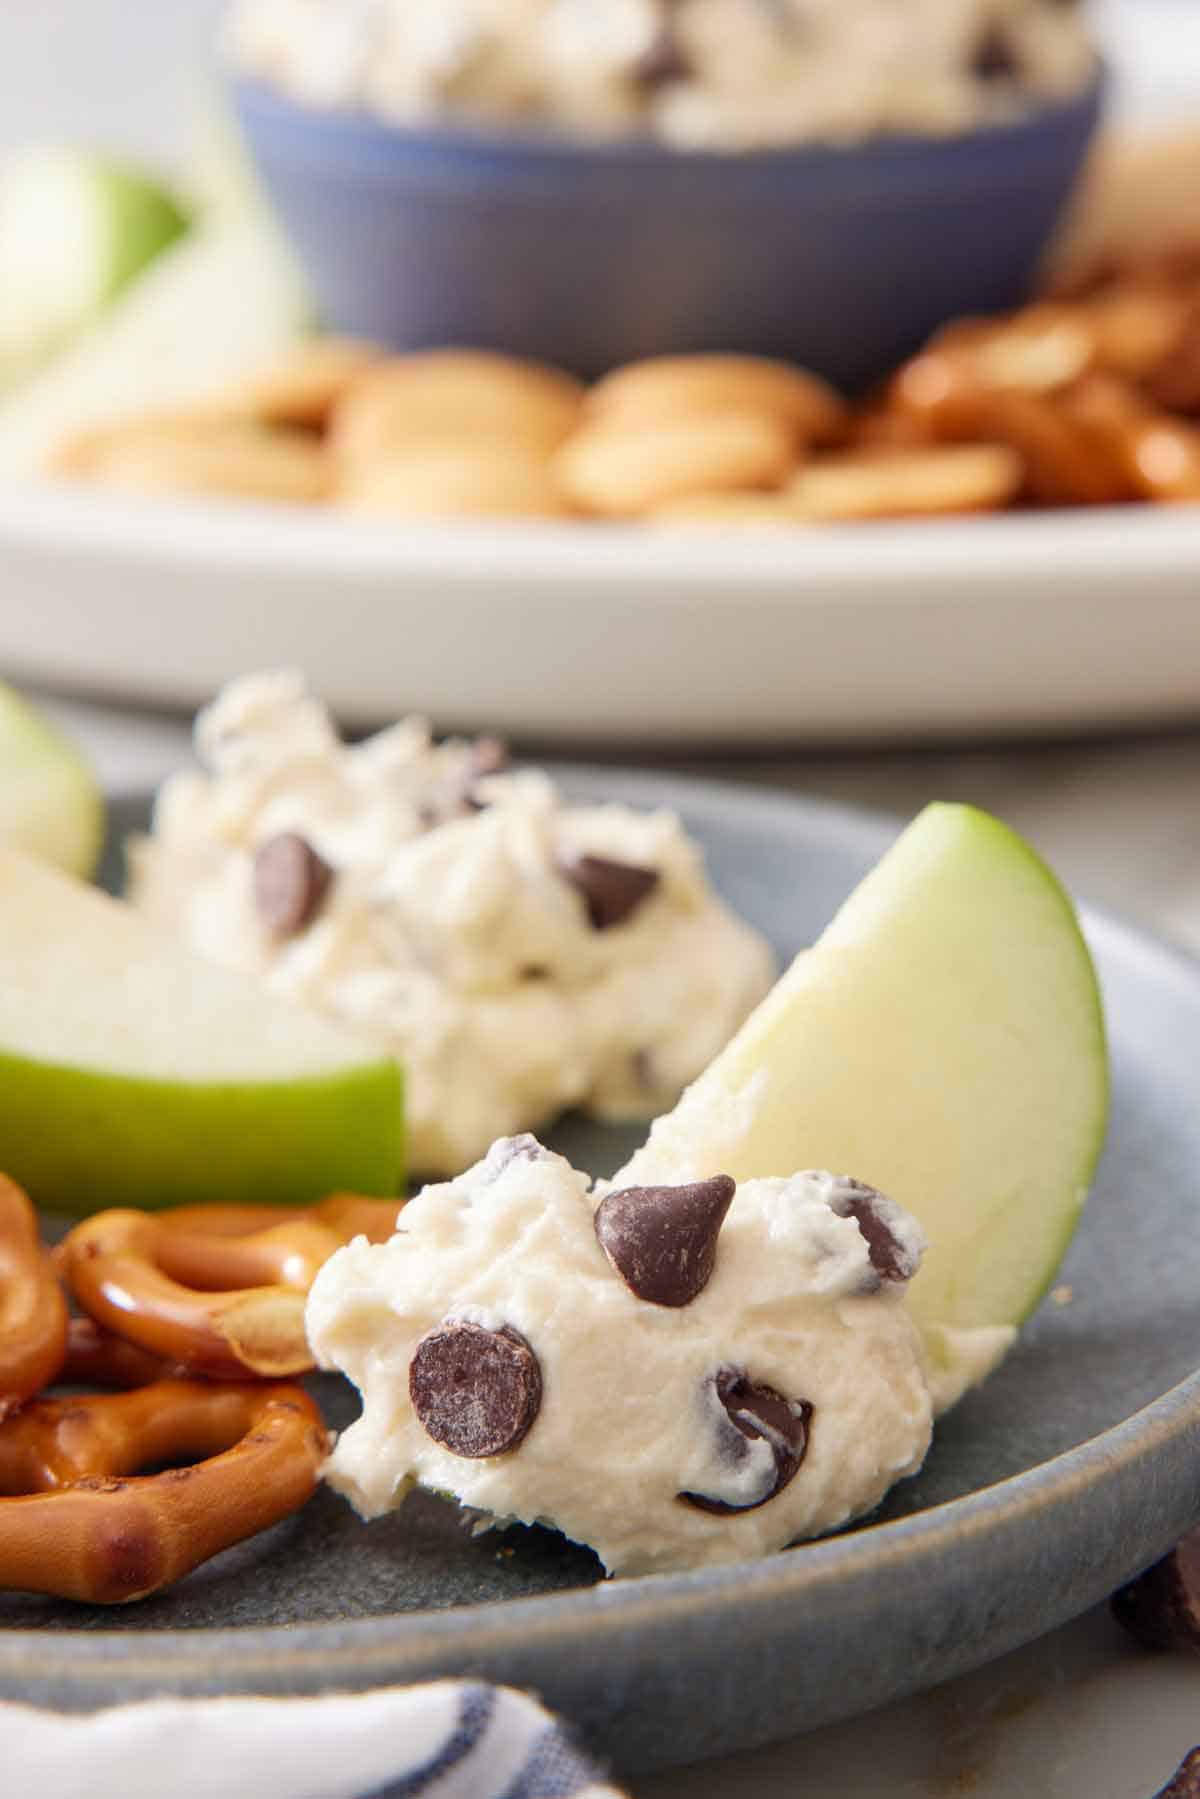 A plate with slice of apple dipped in cookie dough dip. More dip and dippers in the background.